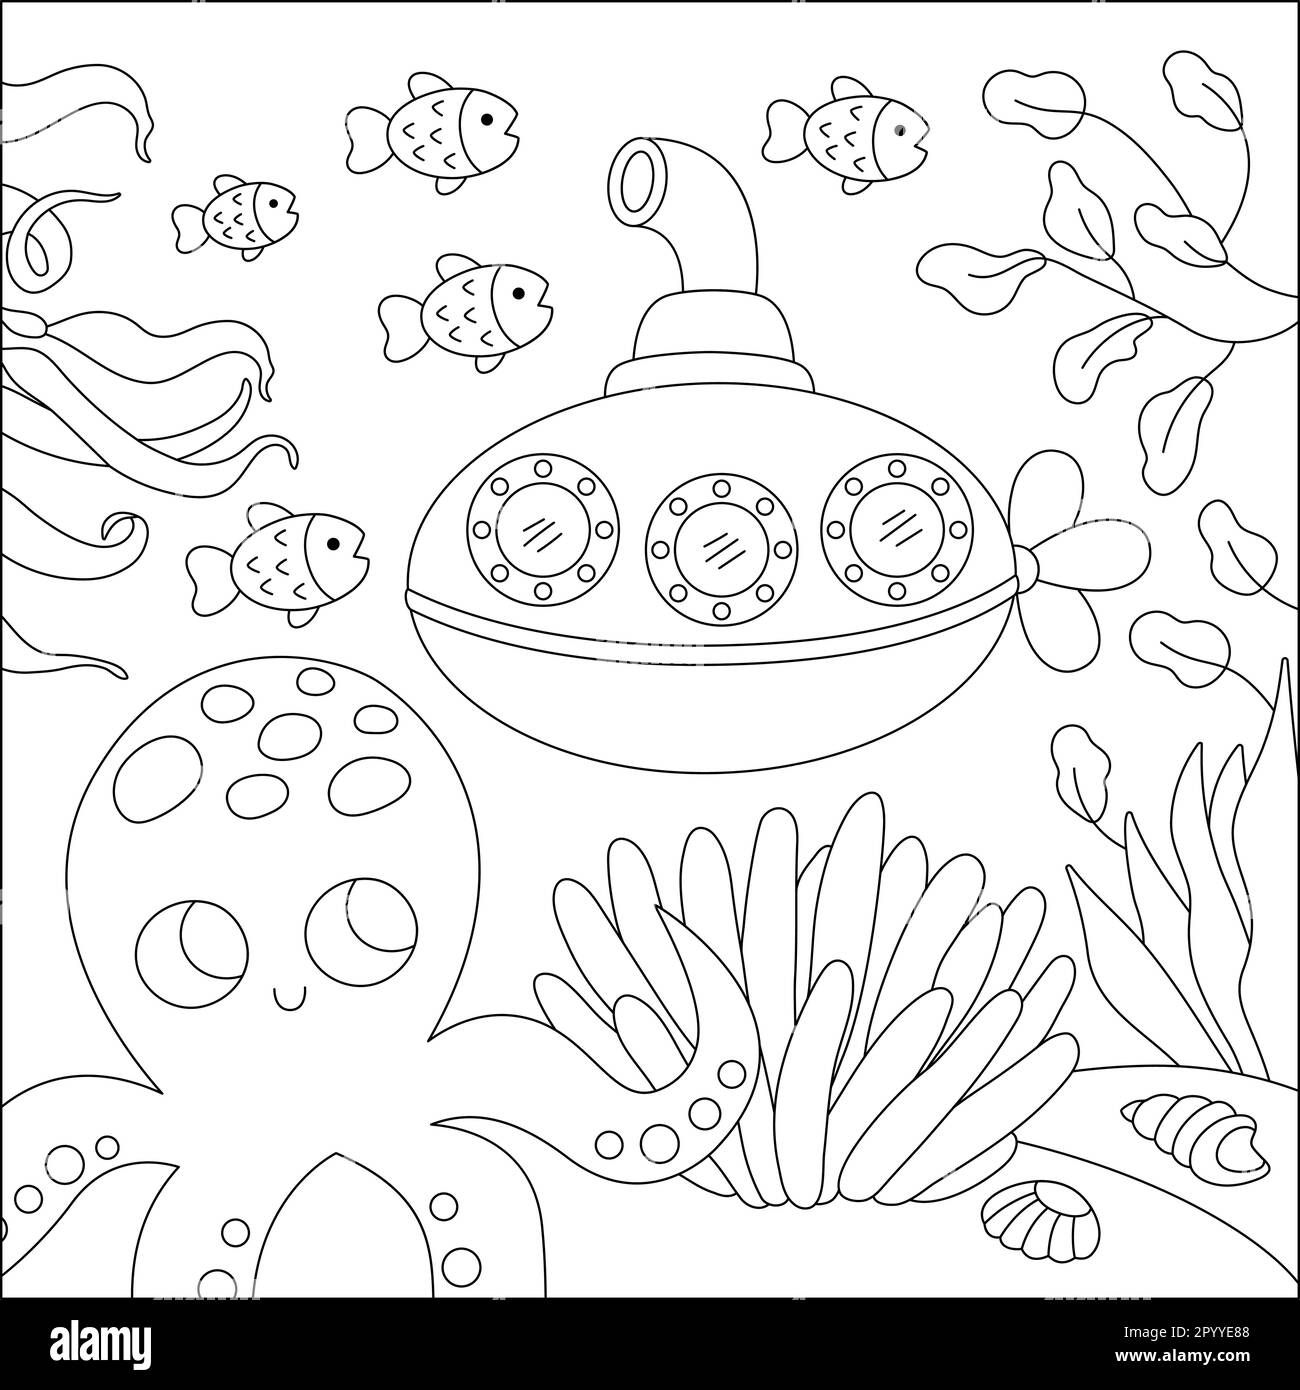 Vector black and white under the sea landscape illustration with octopus and submarine. Ocean life line scene with sand, seaweeds, corals, reefs. Cute Stock Vector